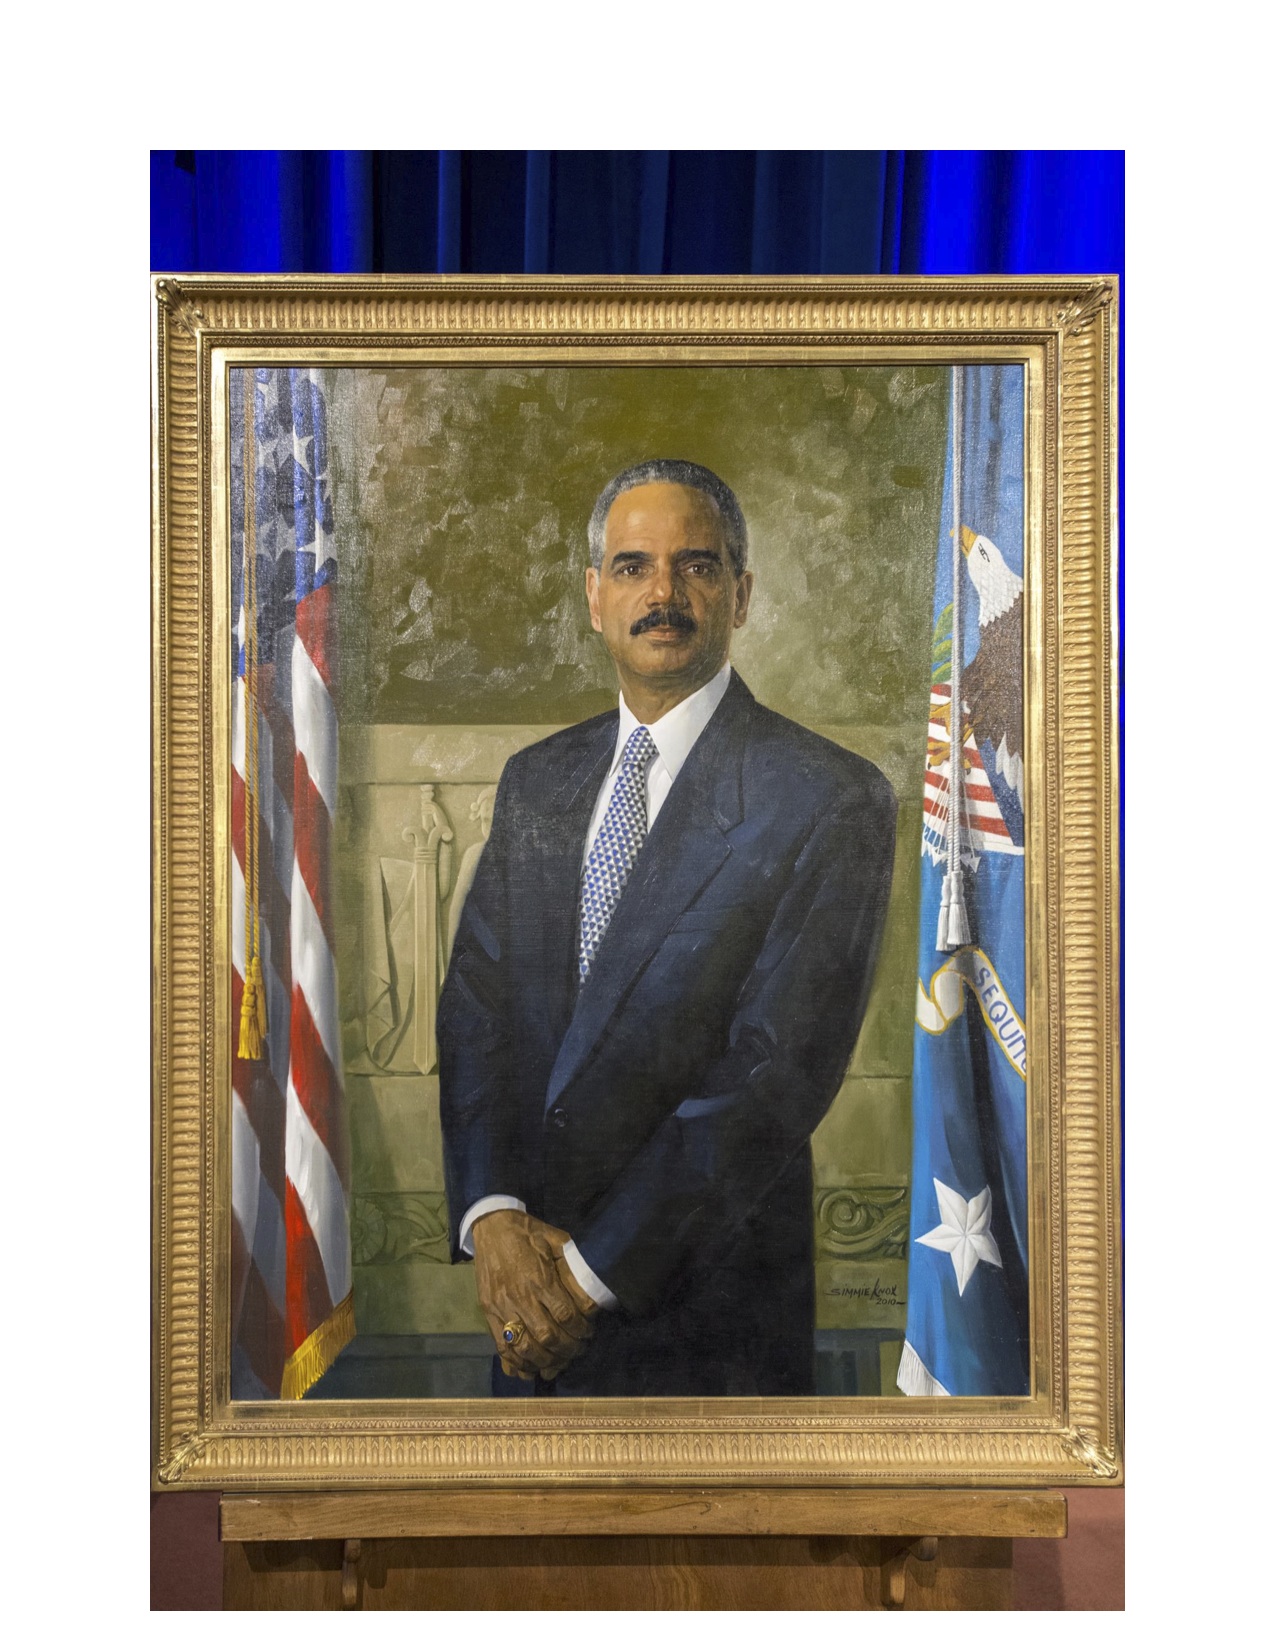 Image Courtesy of the Department of Justice (Attorney General Eric Holder's official portait)